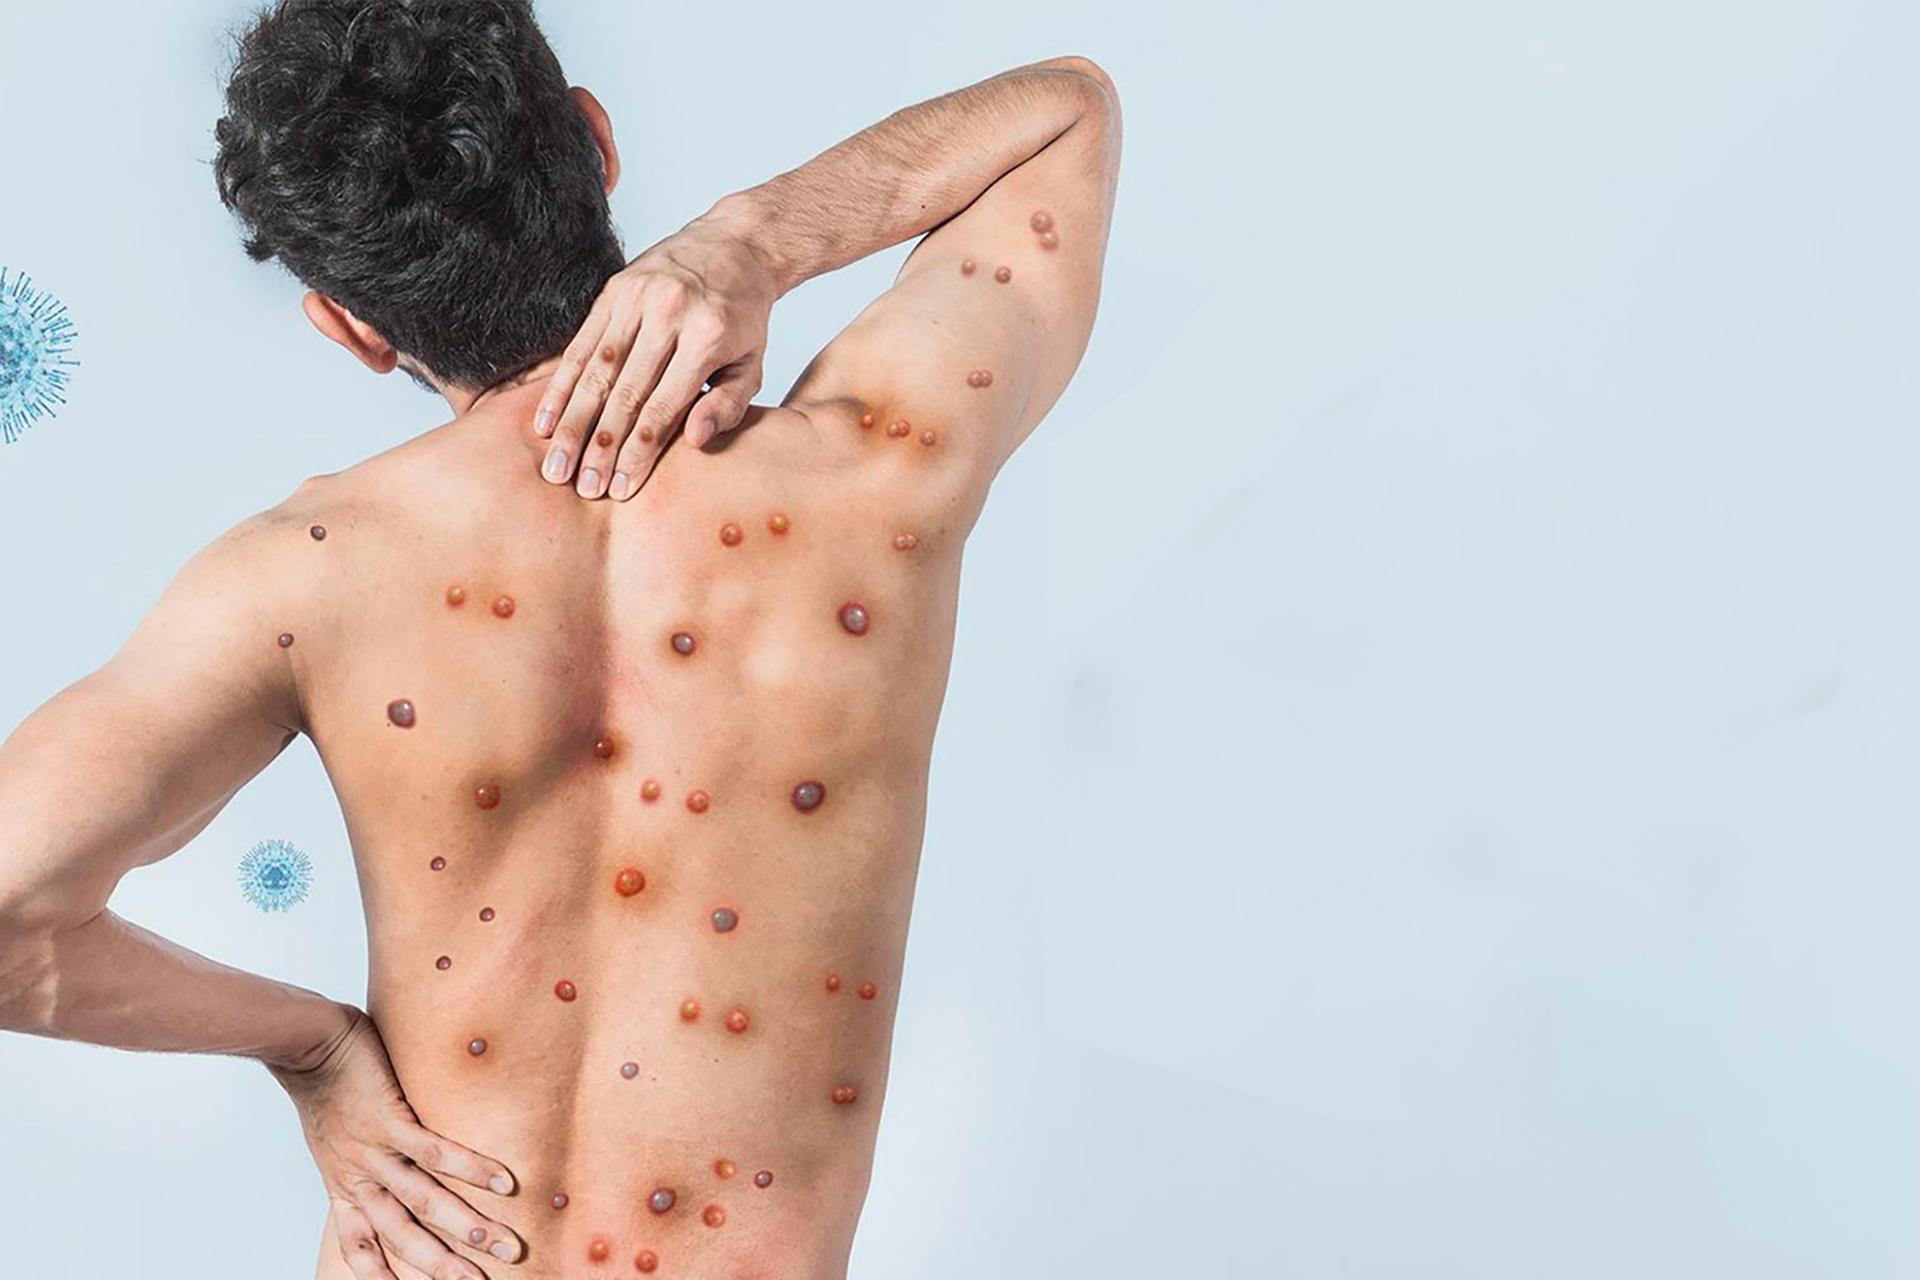 Know About Monkeypox: Symptoms, Causes, Treatment and Prevention